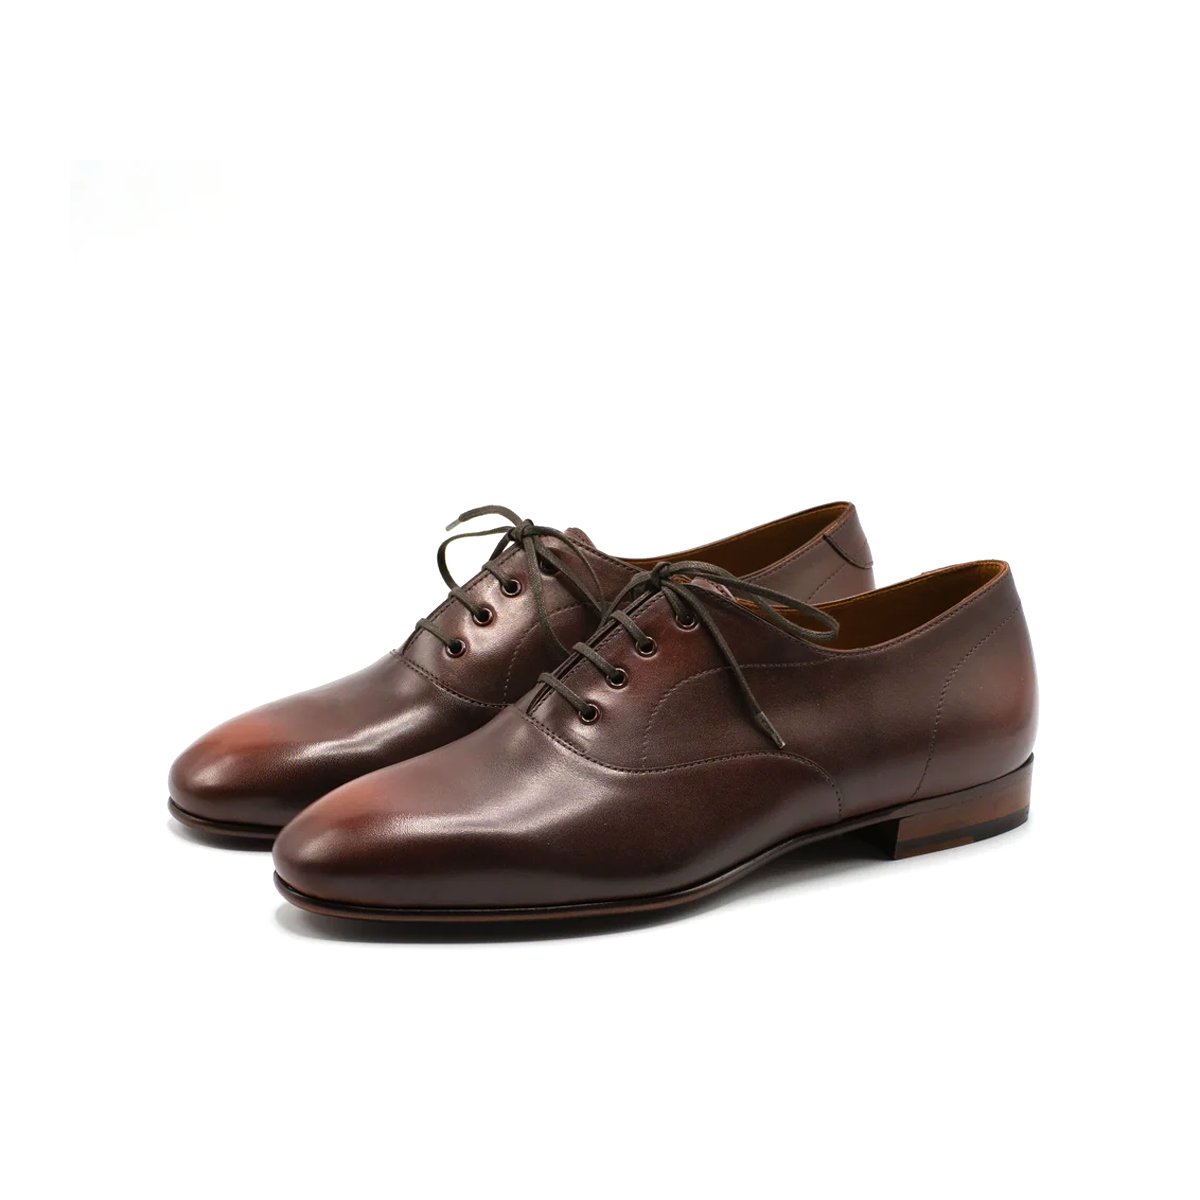 Mirage Mode Oxford Shoes